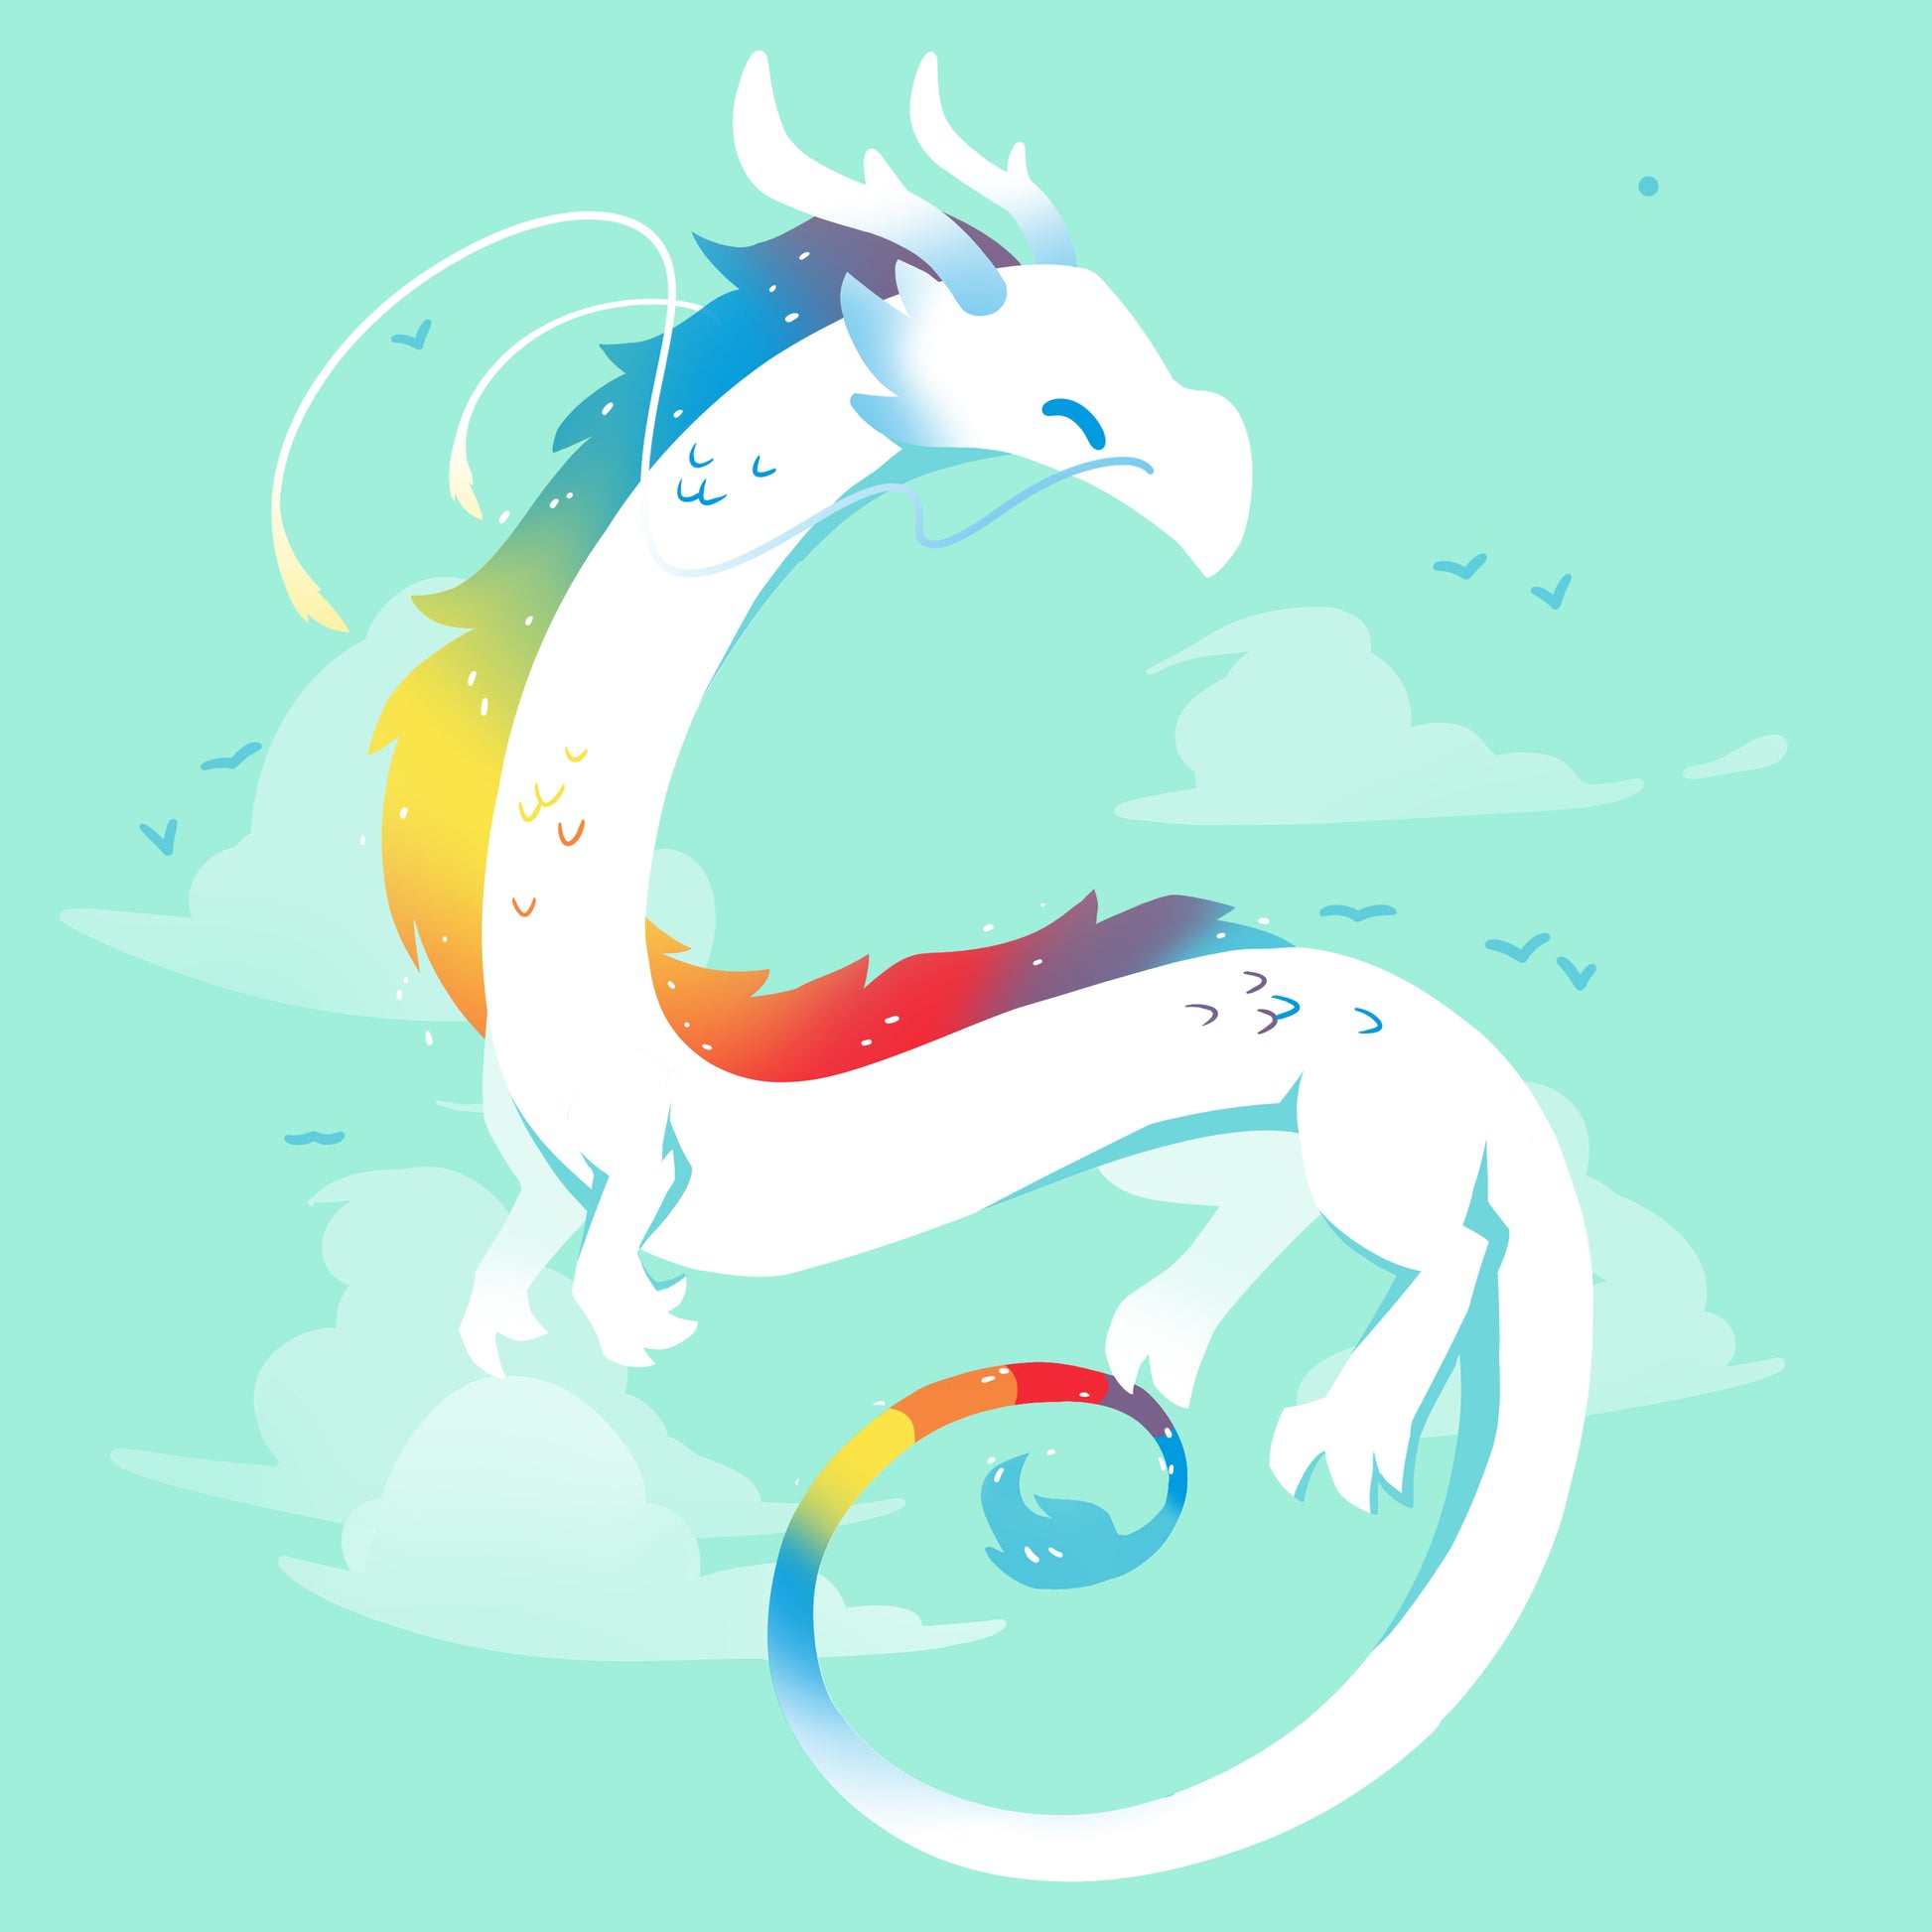 A TeeTurtle original, the TeeTurtle Rainbow Dragon soars through the sky with its chill blue tail.